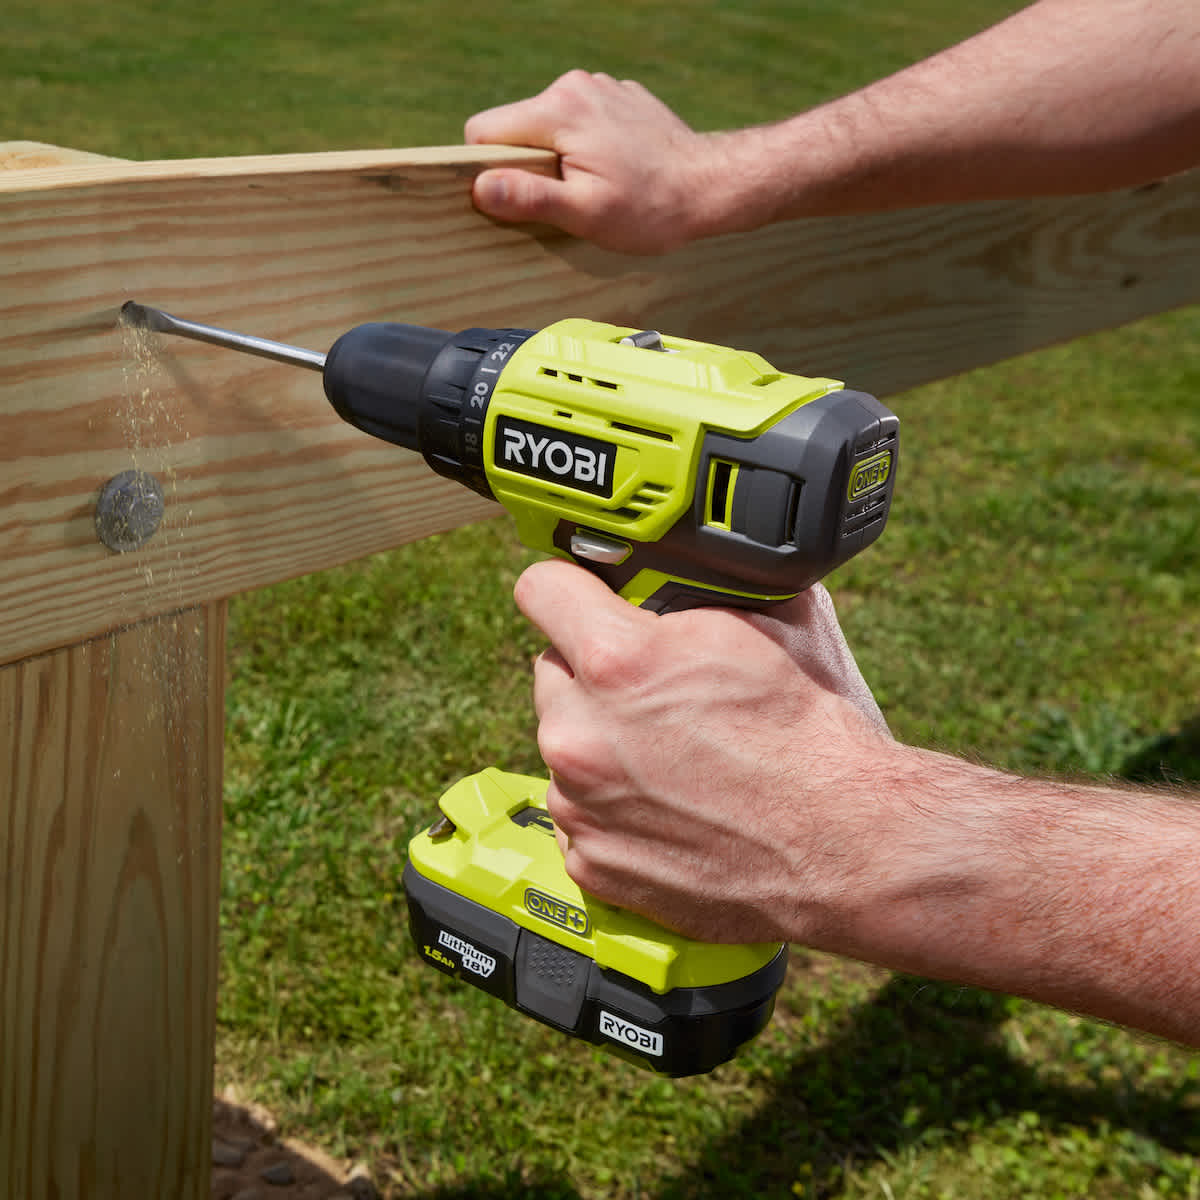 Product Features Image for 18V ONE+ LITHIUM-ION CORDLESS 1/2" DRILL/DRIVER AND RECIPROCATING SAW KIT.